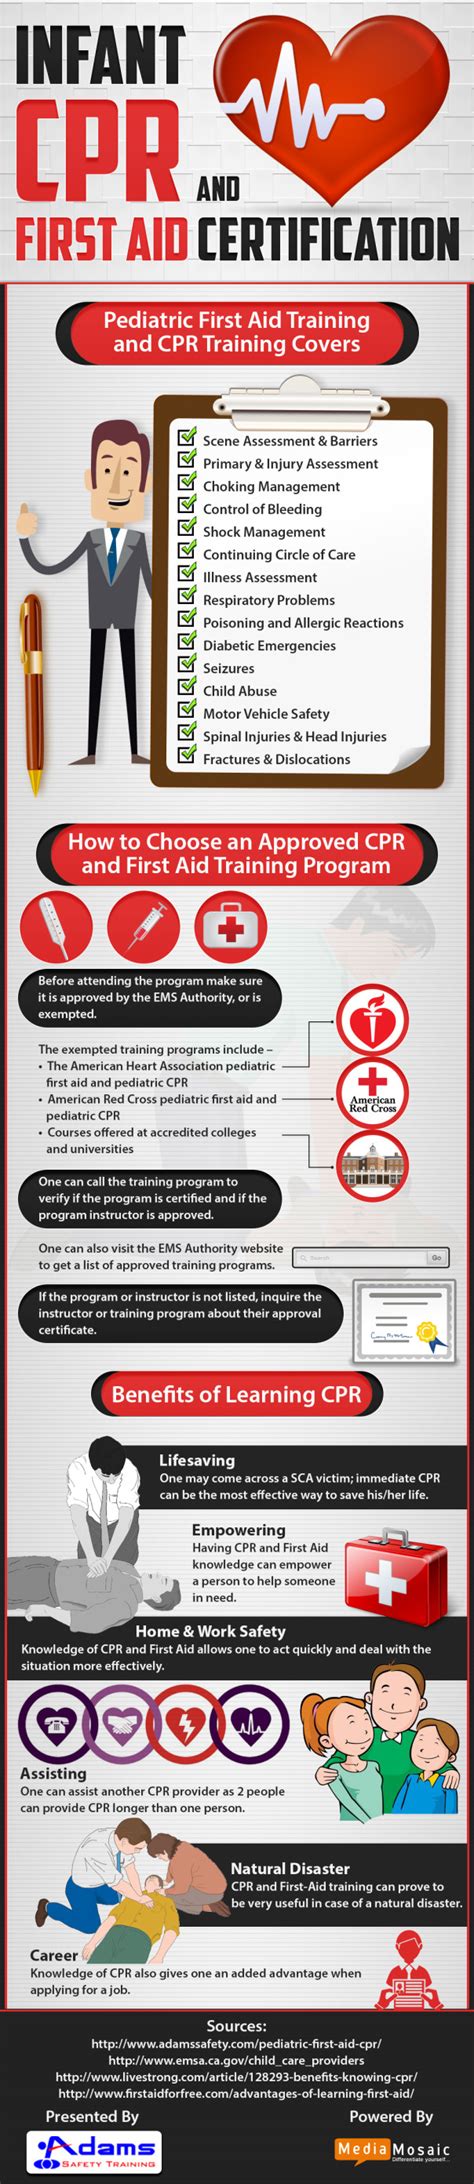 infant cpr and first aid certification infographic